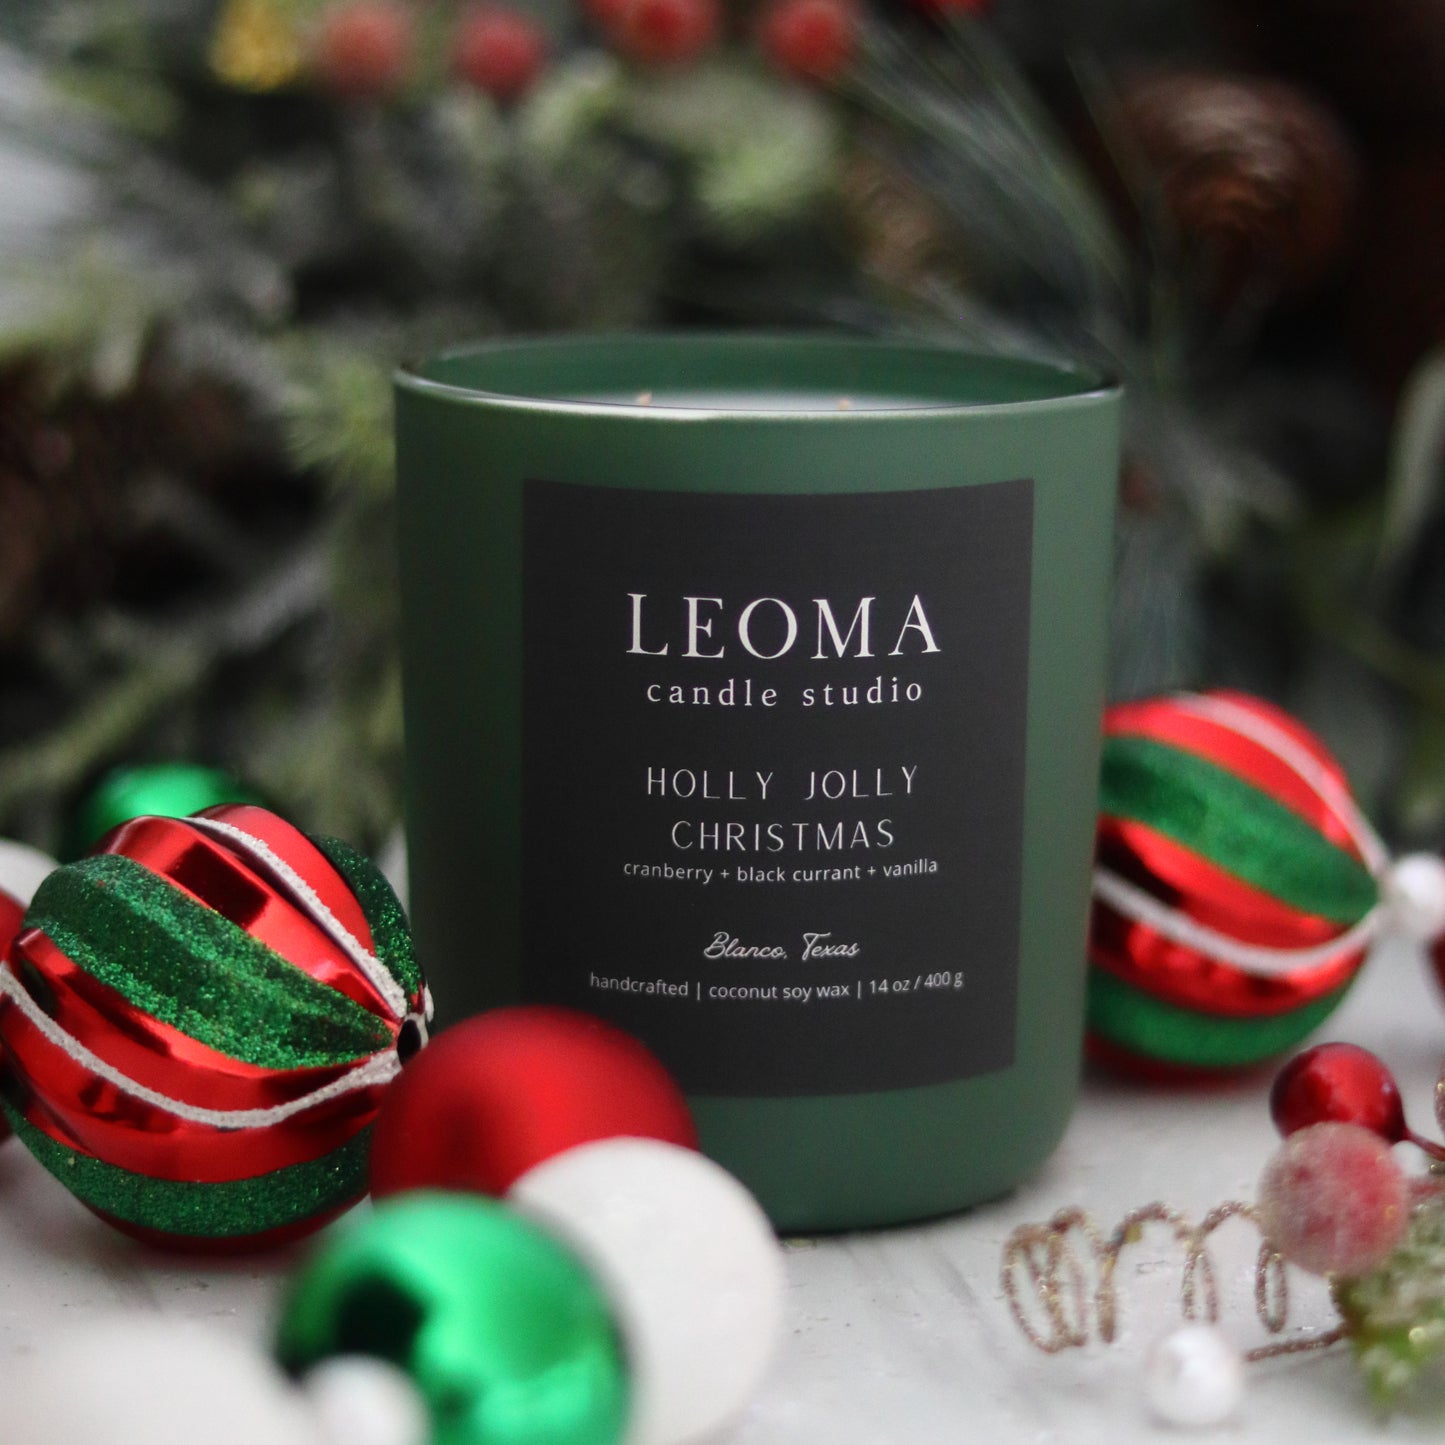 Handcrafted eco-friendly scented candle. Natural coconut & soy wax, toxin-free, 100% cotton wicks. Olive vessel. Holly Jolly Christmas scented.